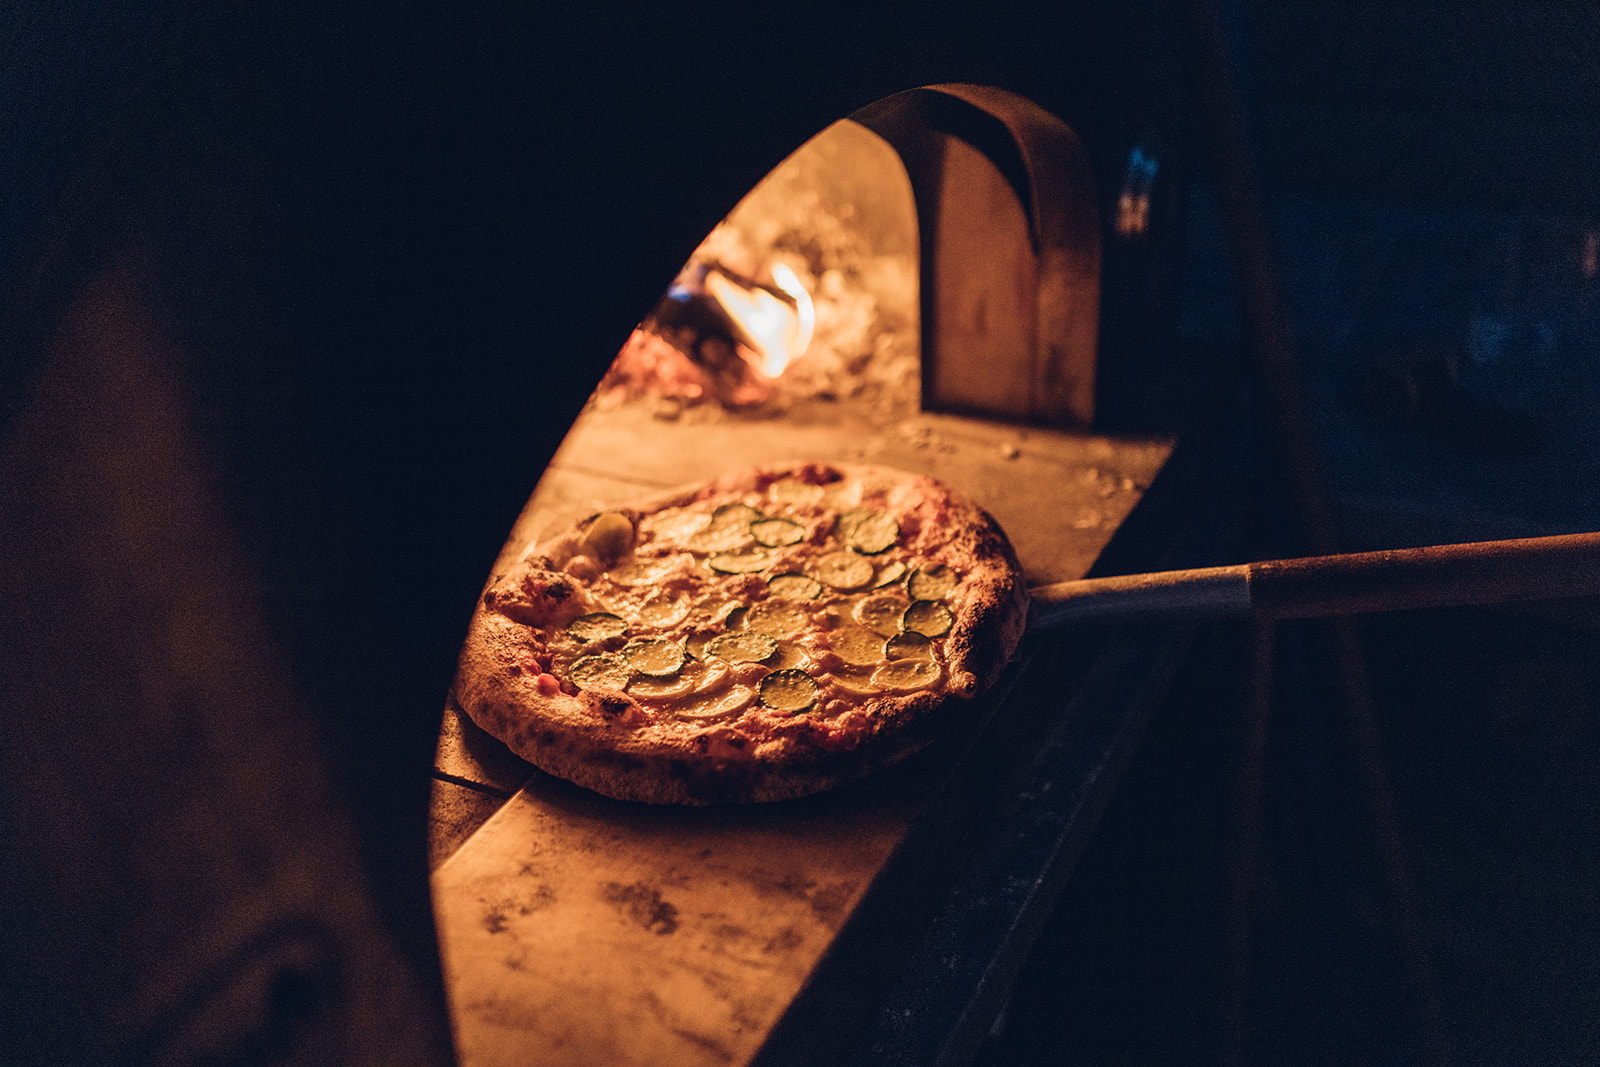 Pizza being pulled out of wood burning oven.